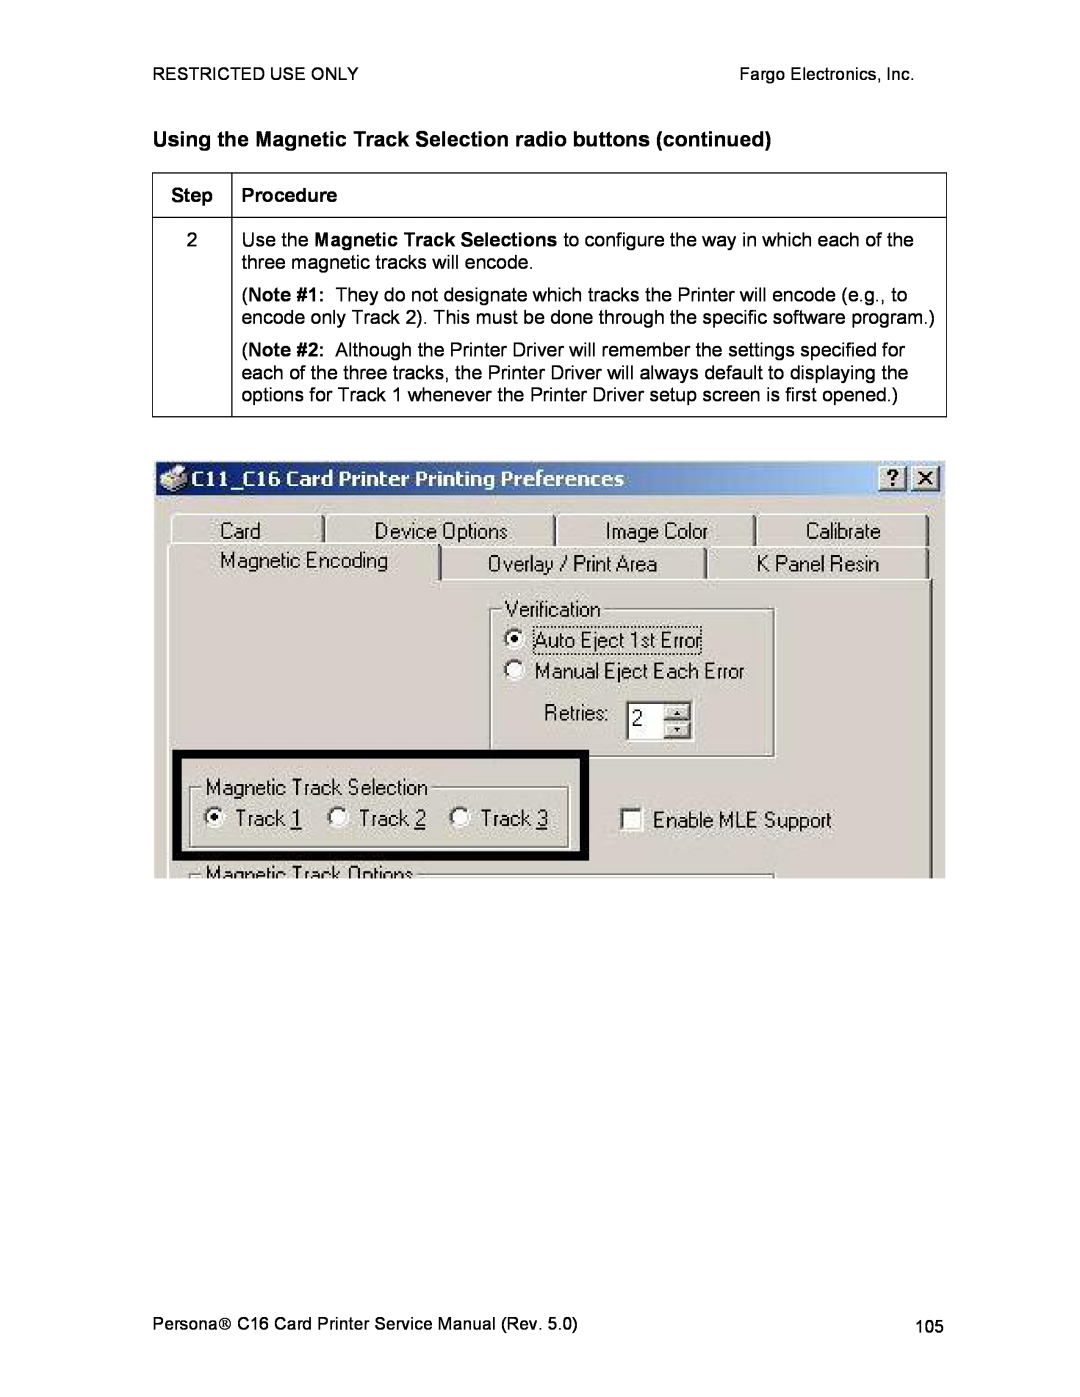 FARGO electronic C16 service manual Using the Magnetic Track Selection radio buttons continued 